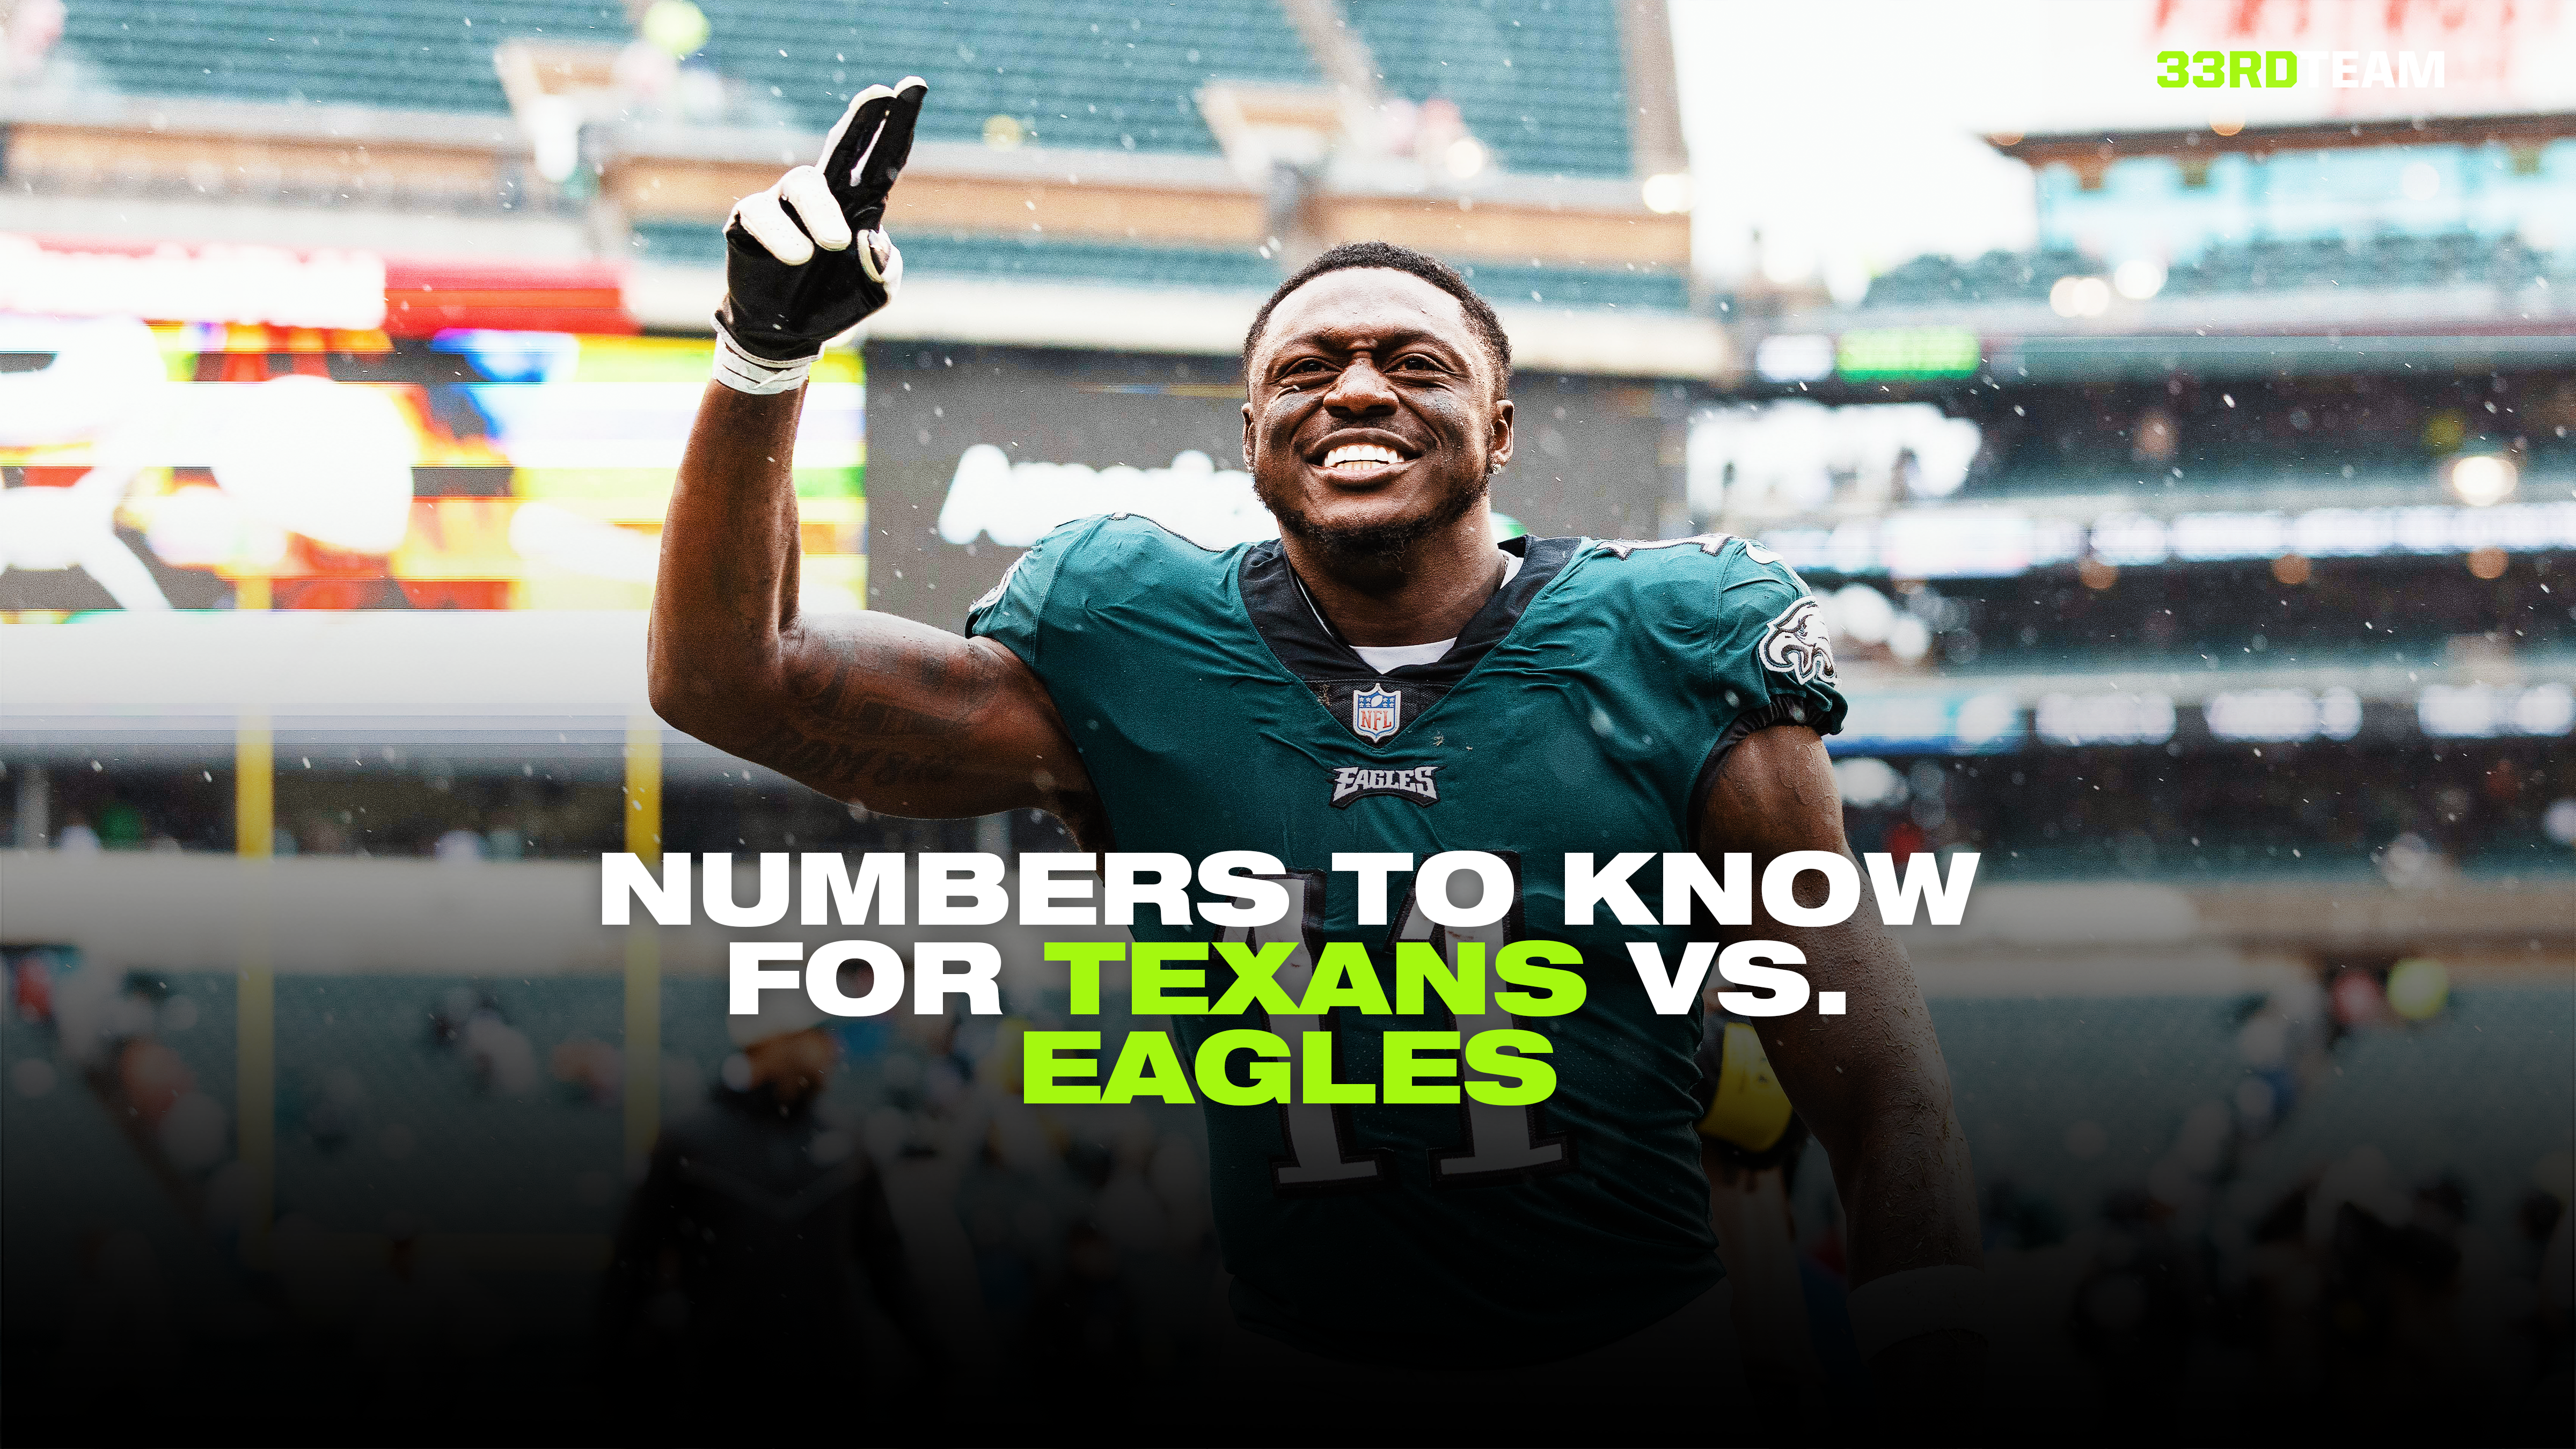 Numbers to Know for Eagles vs. Texans